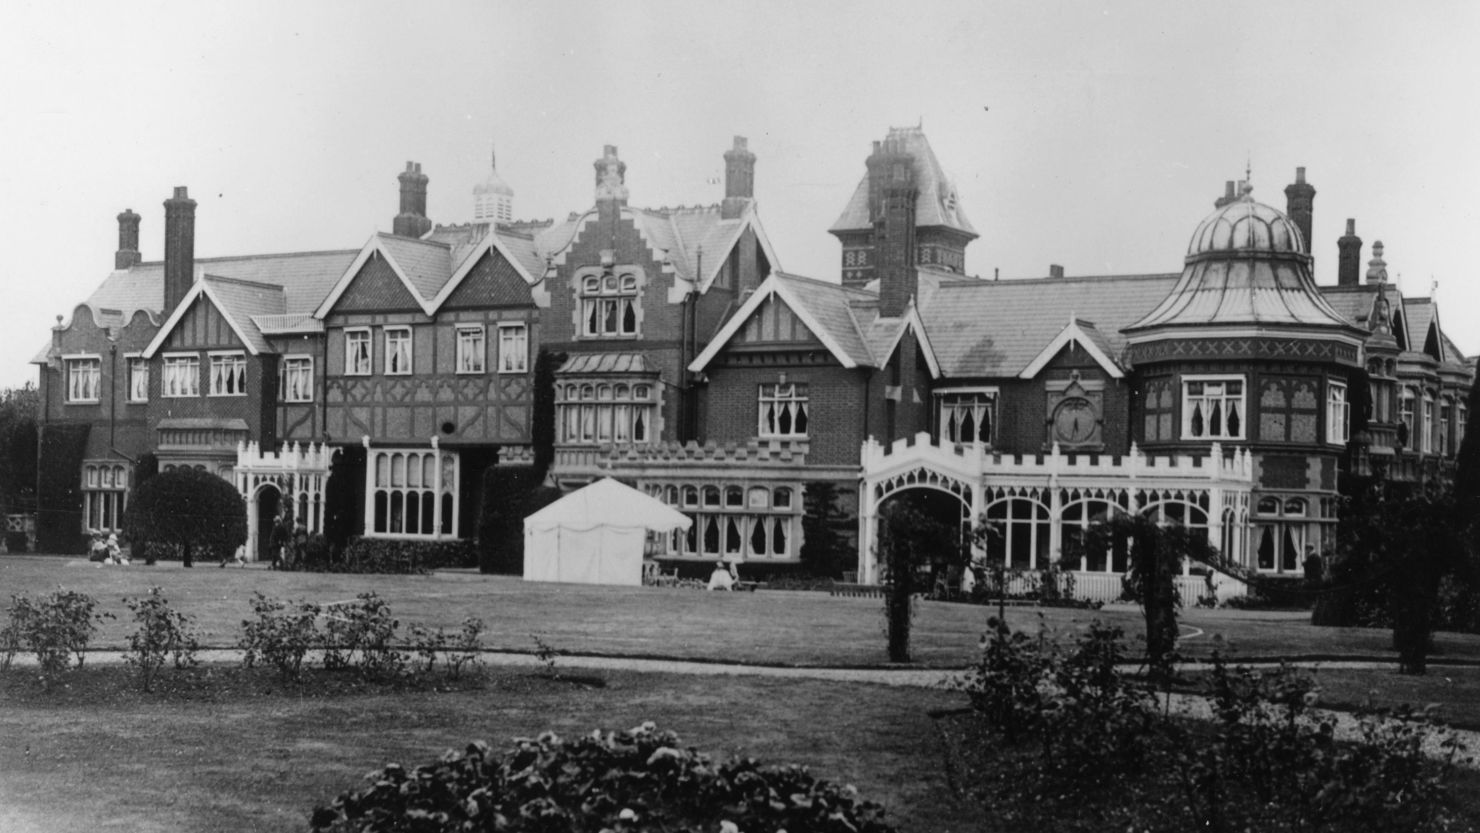 Allied crpytographers at Bletchley Park broke Nazi codes during WWII.